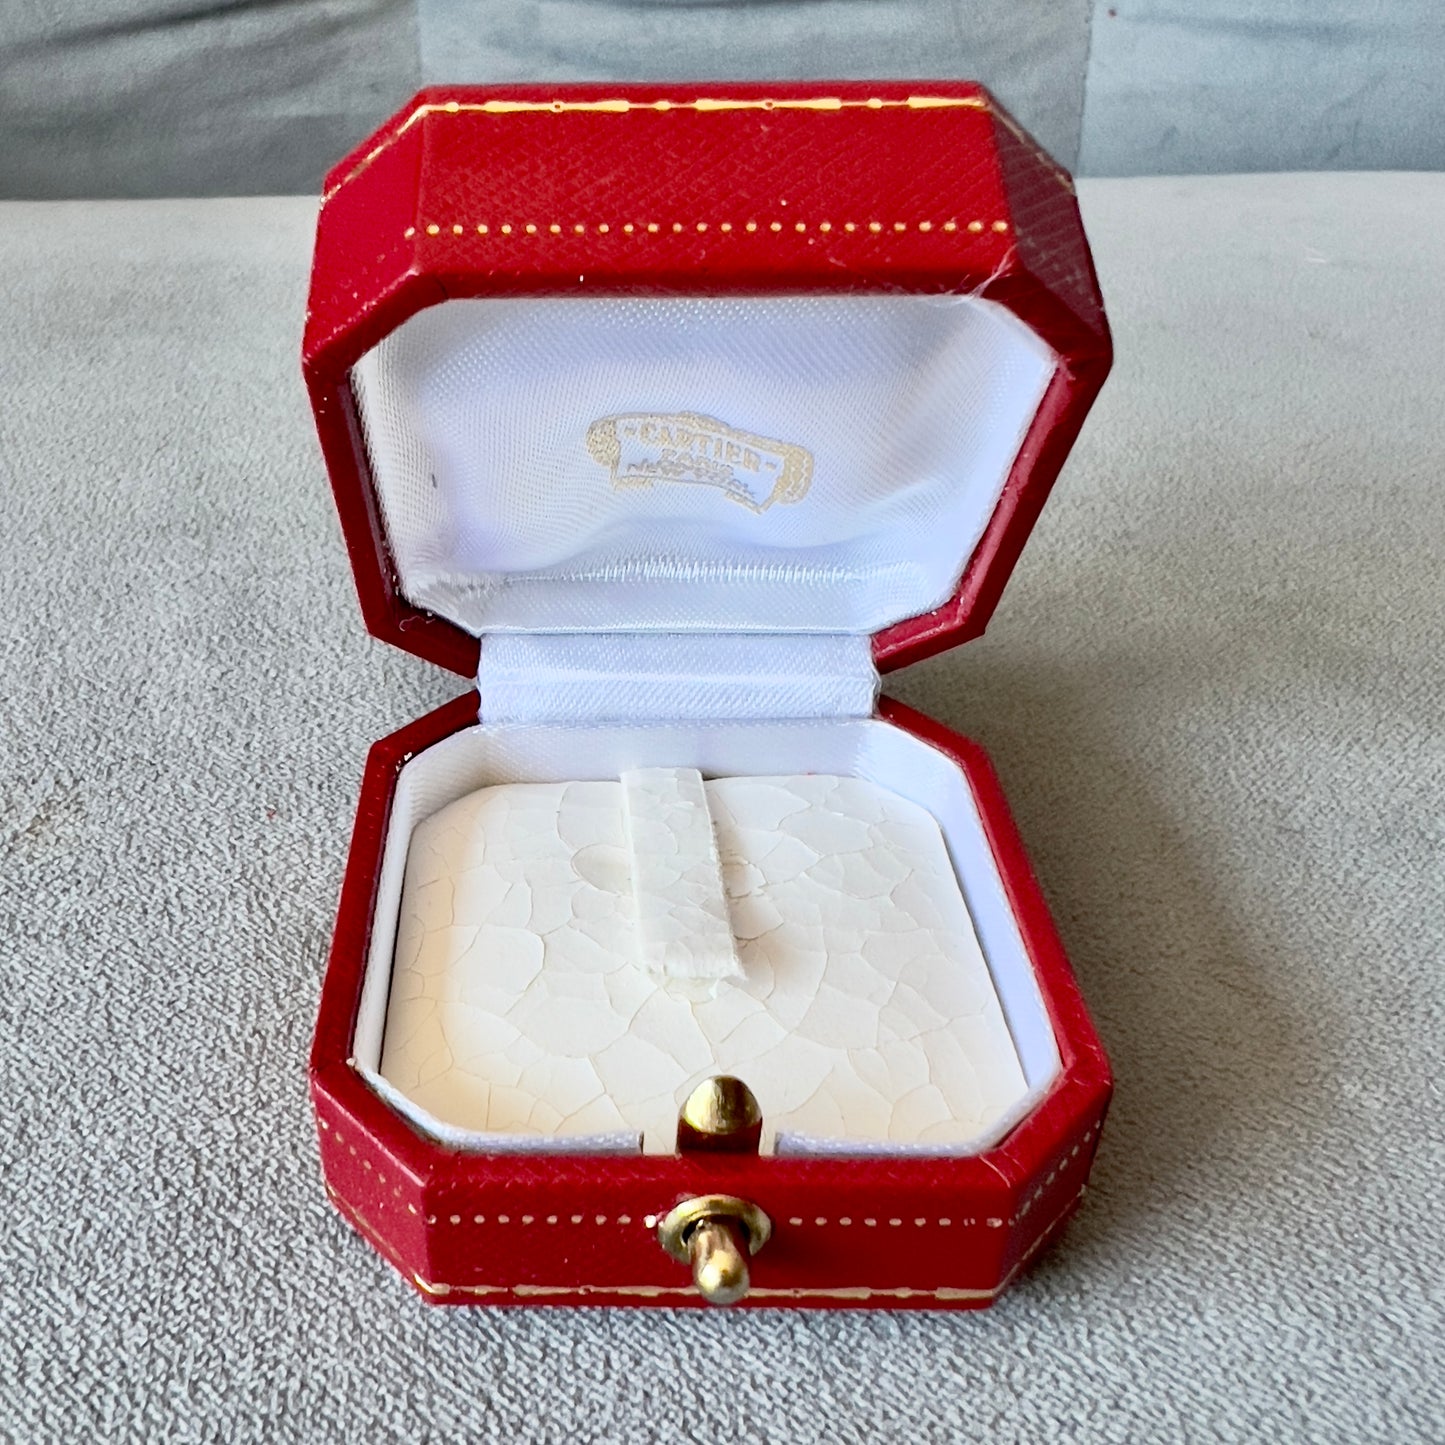 CARTIER Ring Box 2x2x1.25 inches